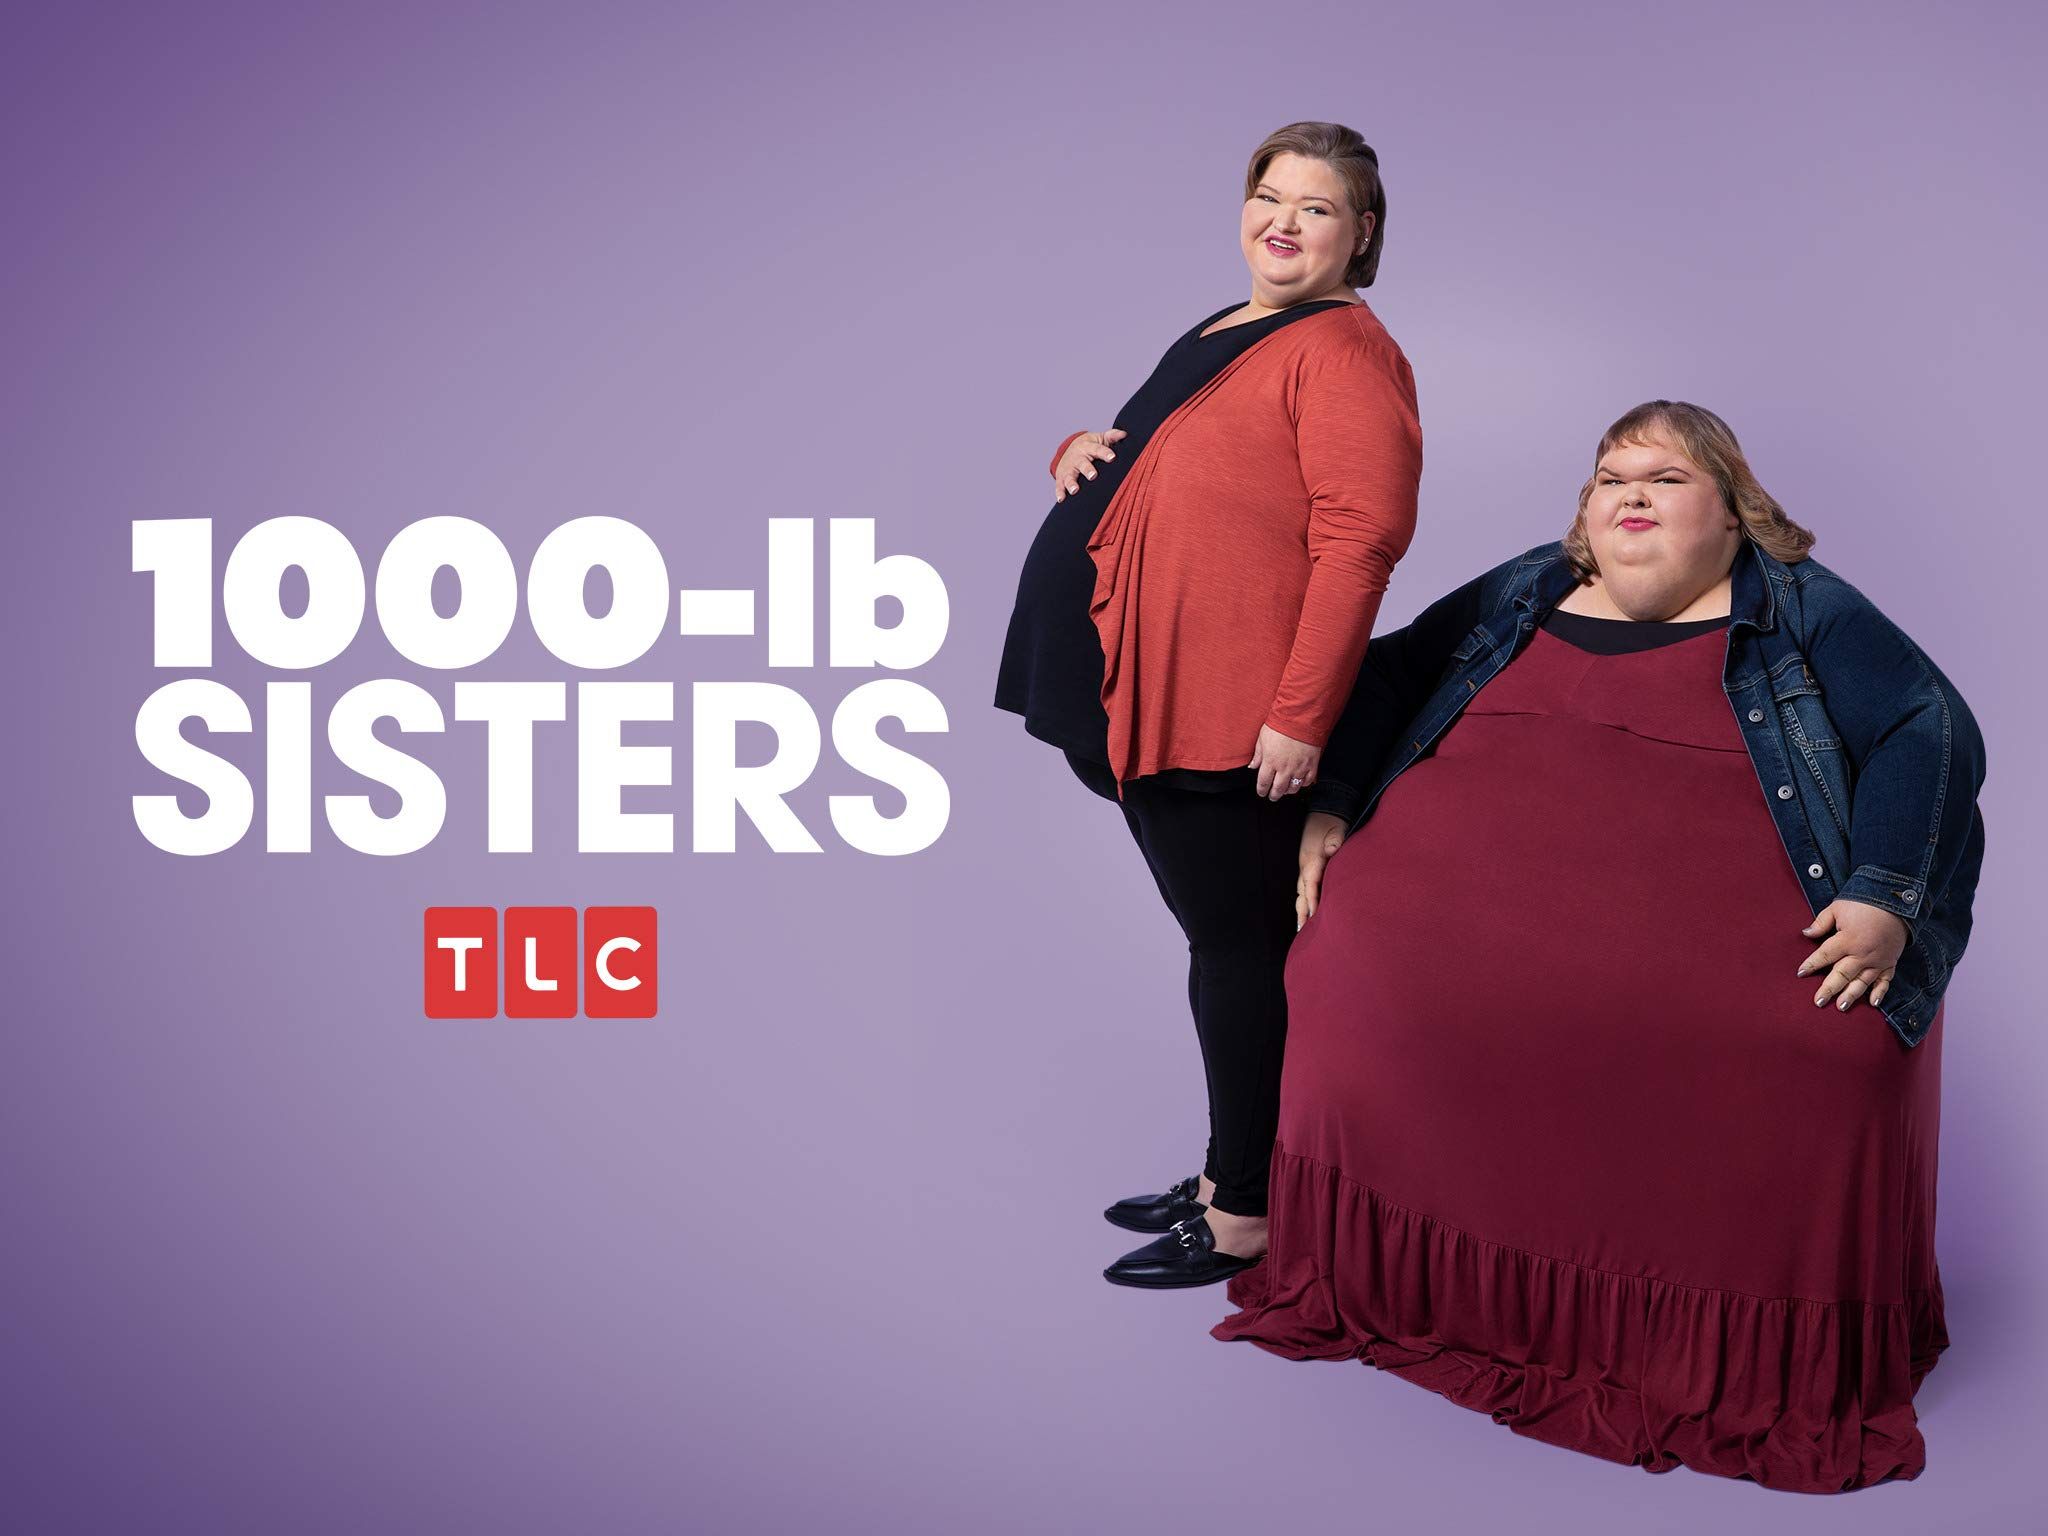 1000 Lb Sisters Tammy Slaton Cried After Learning She Weighed 717 Pounds Ibtimes 